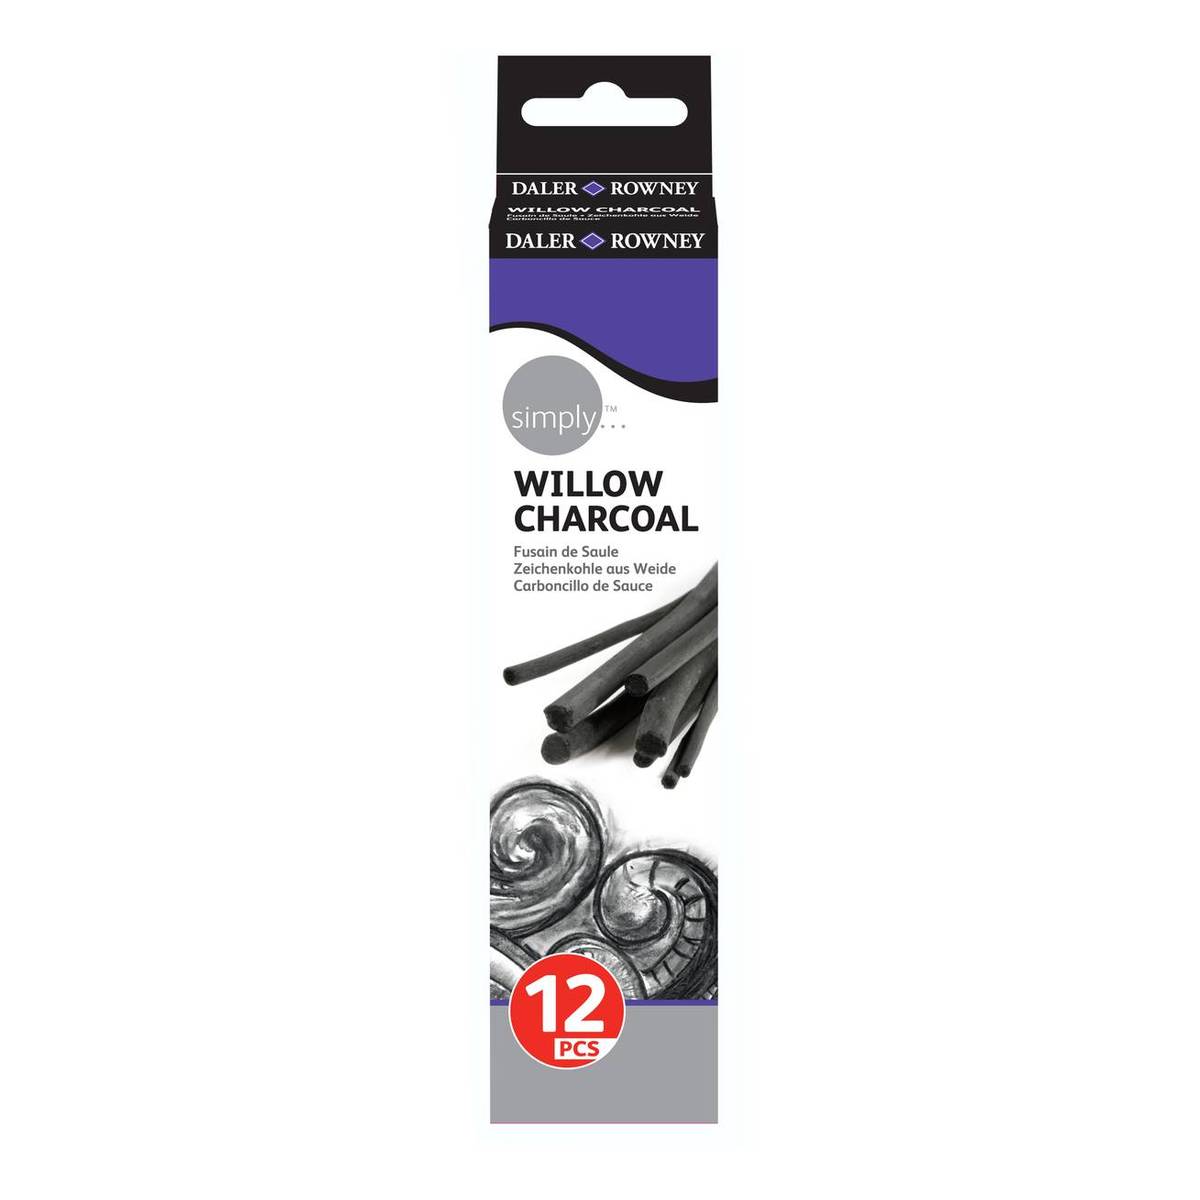  Winsor & Newton Artists' Willow Charcoal, Thin, Box of 12